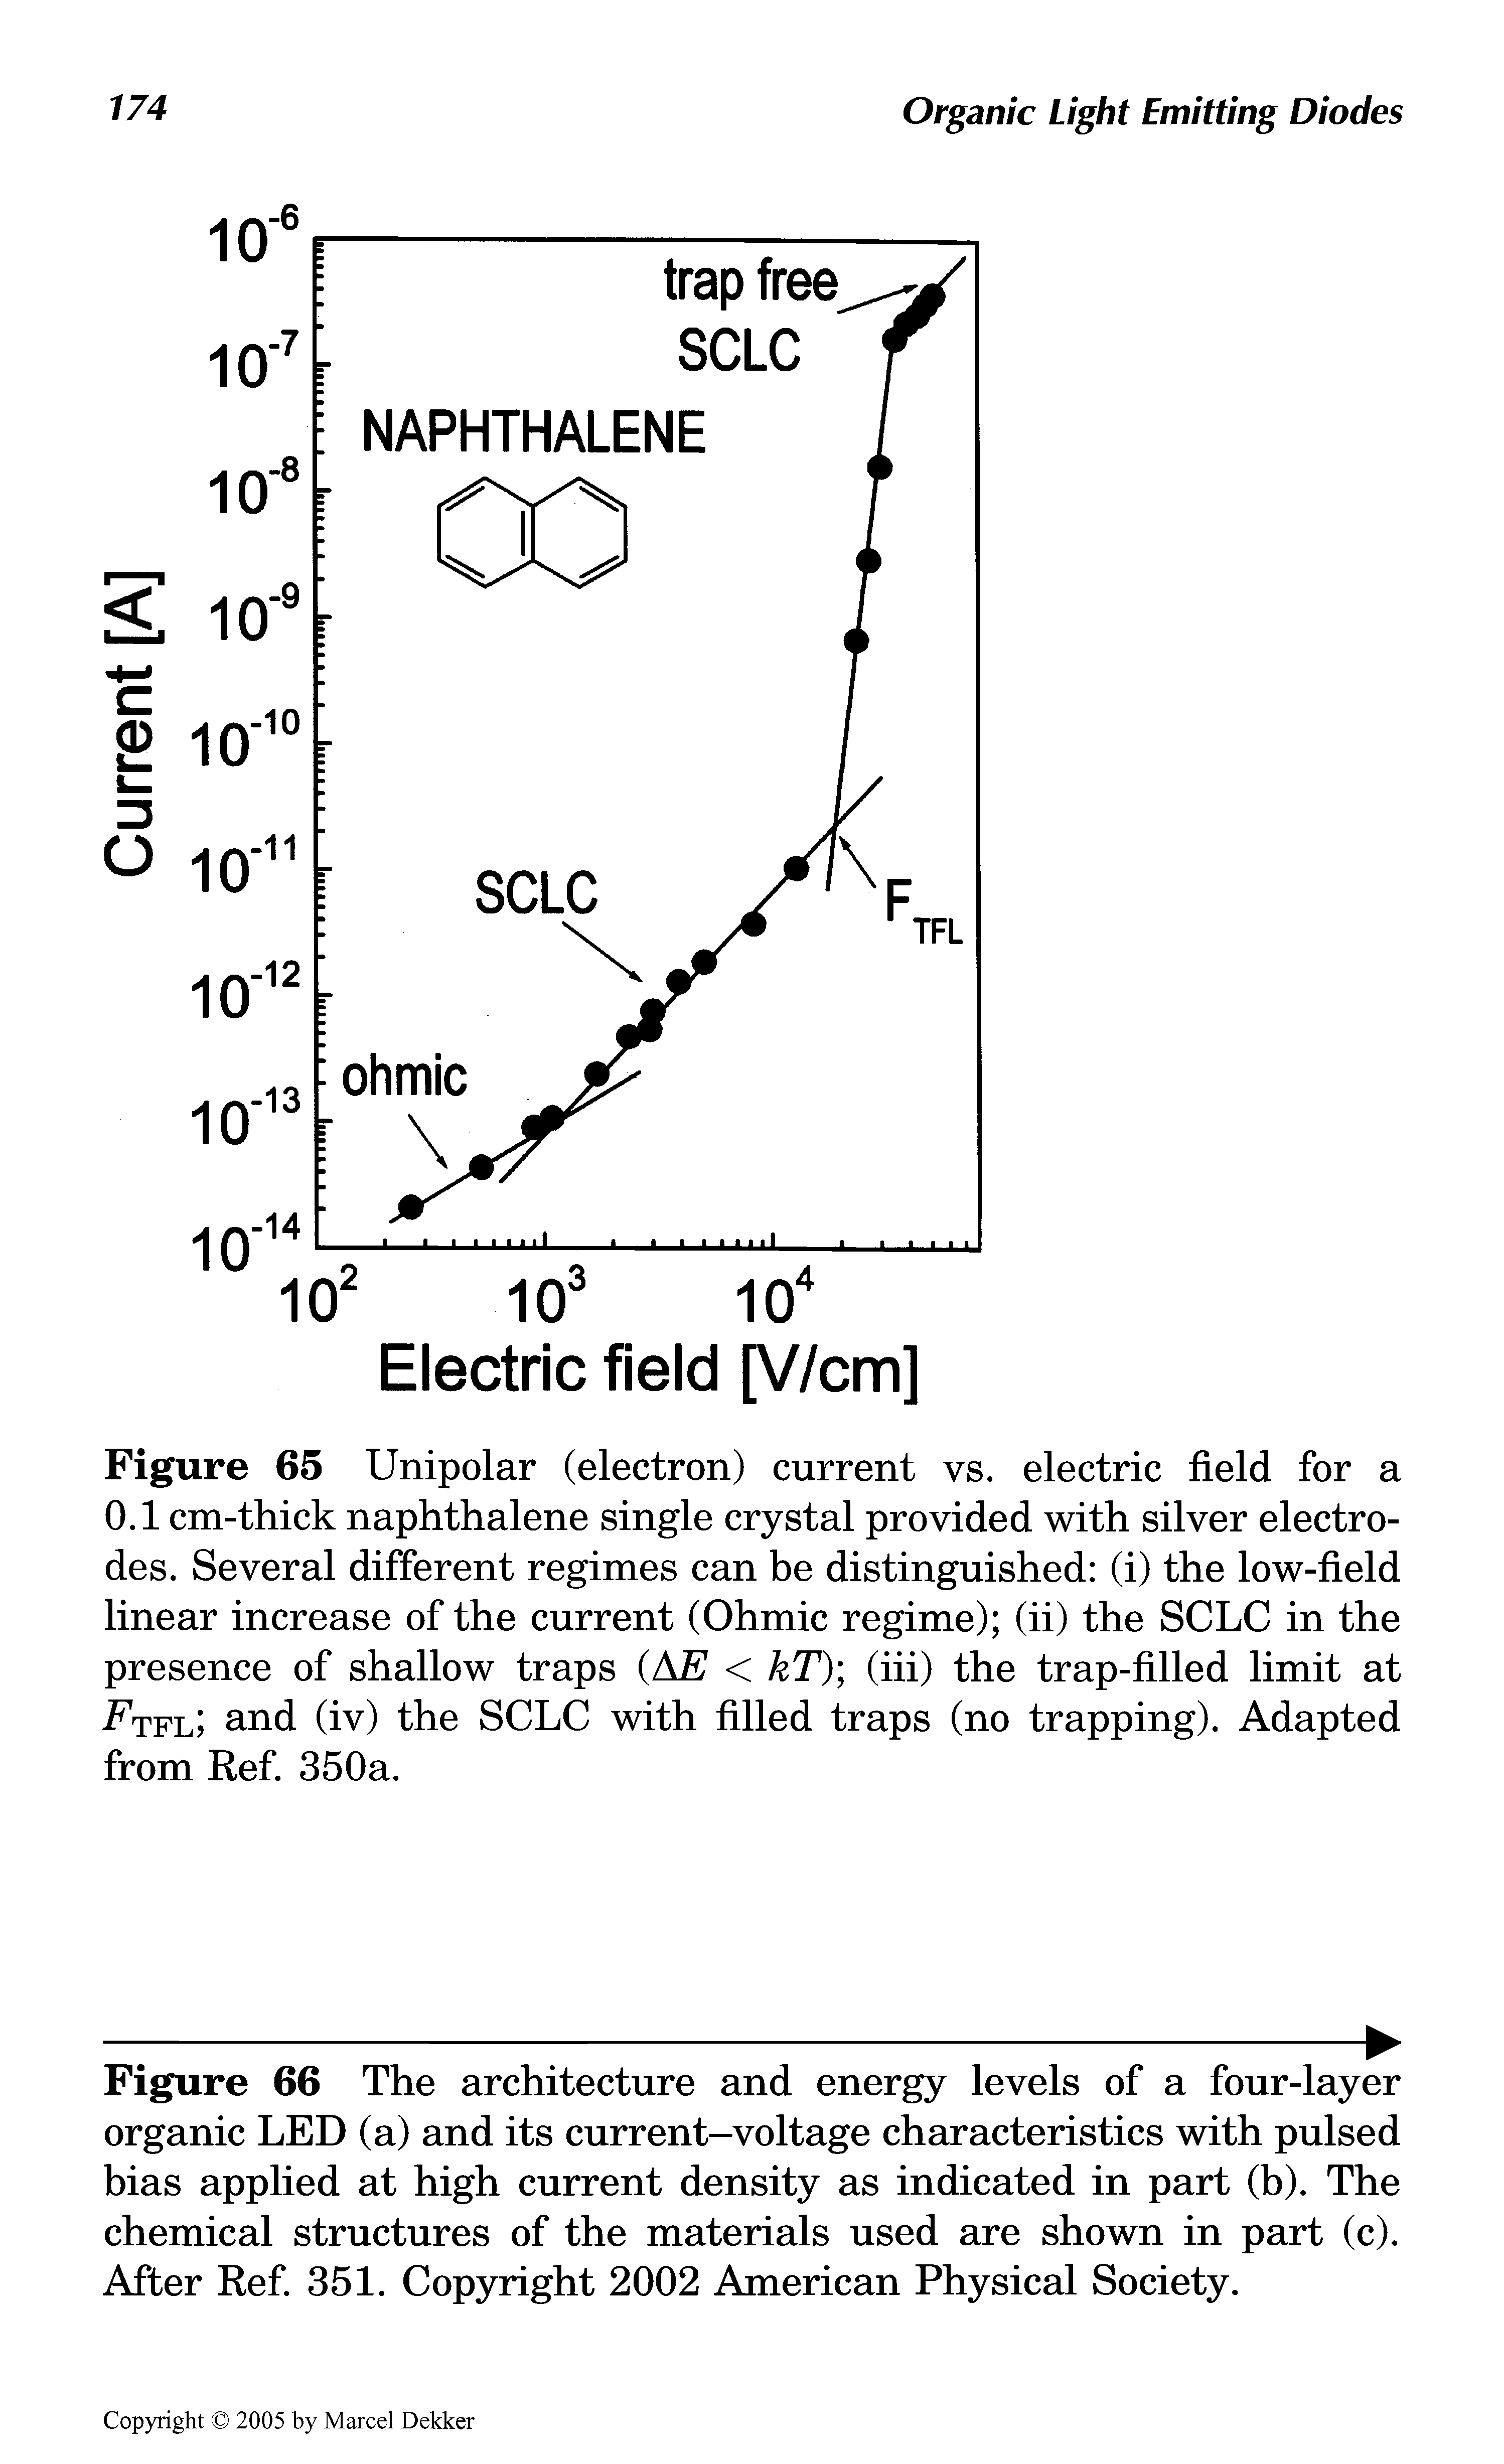 Figure 65 Unipolar (electron) current vs. electric field for a 0.1 cm-thick naphthalene single crystal provided with silver electrodes. Several different regimes can be distinguished (i) the low-field linear increase of the current (Ohmic regime) (ii) the SCLC in the presence of shallow traps (AE < kT) (iii) the trap-filled limit at FTFl and (iv) the SCLC with filled traps (no trapping). Adapted from Ref. 350a.